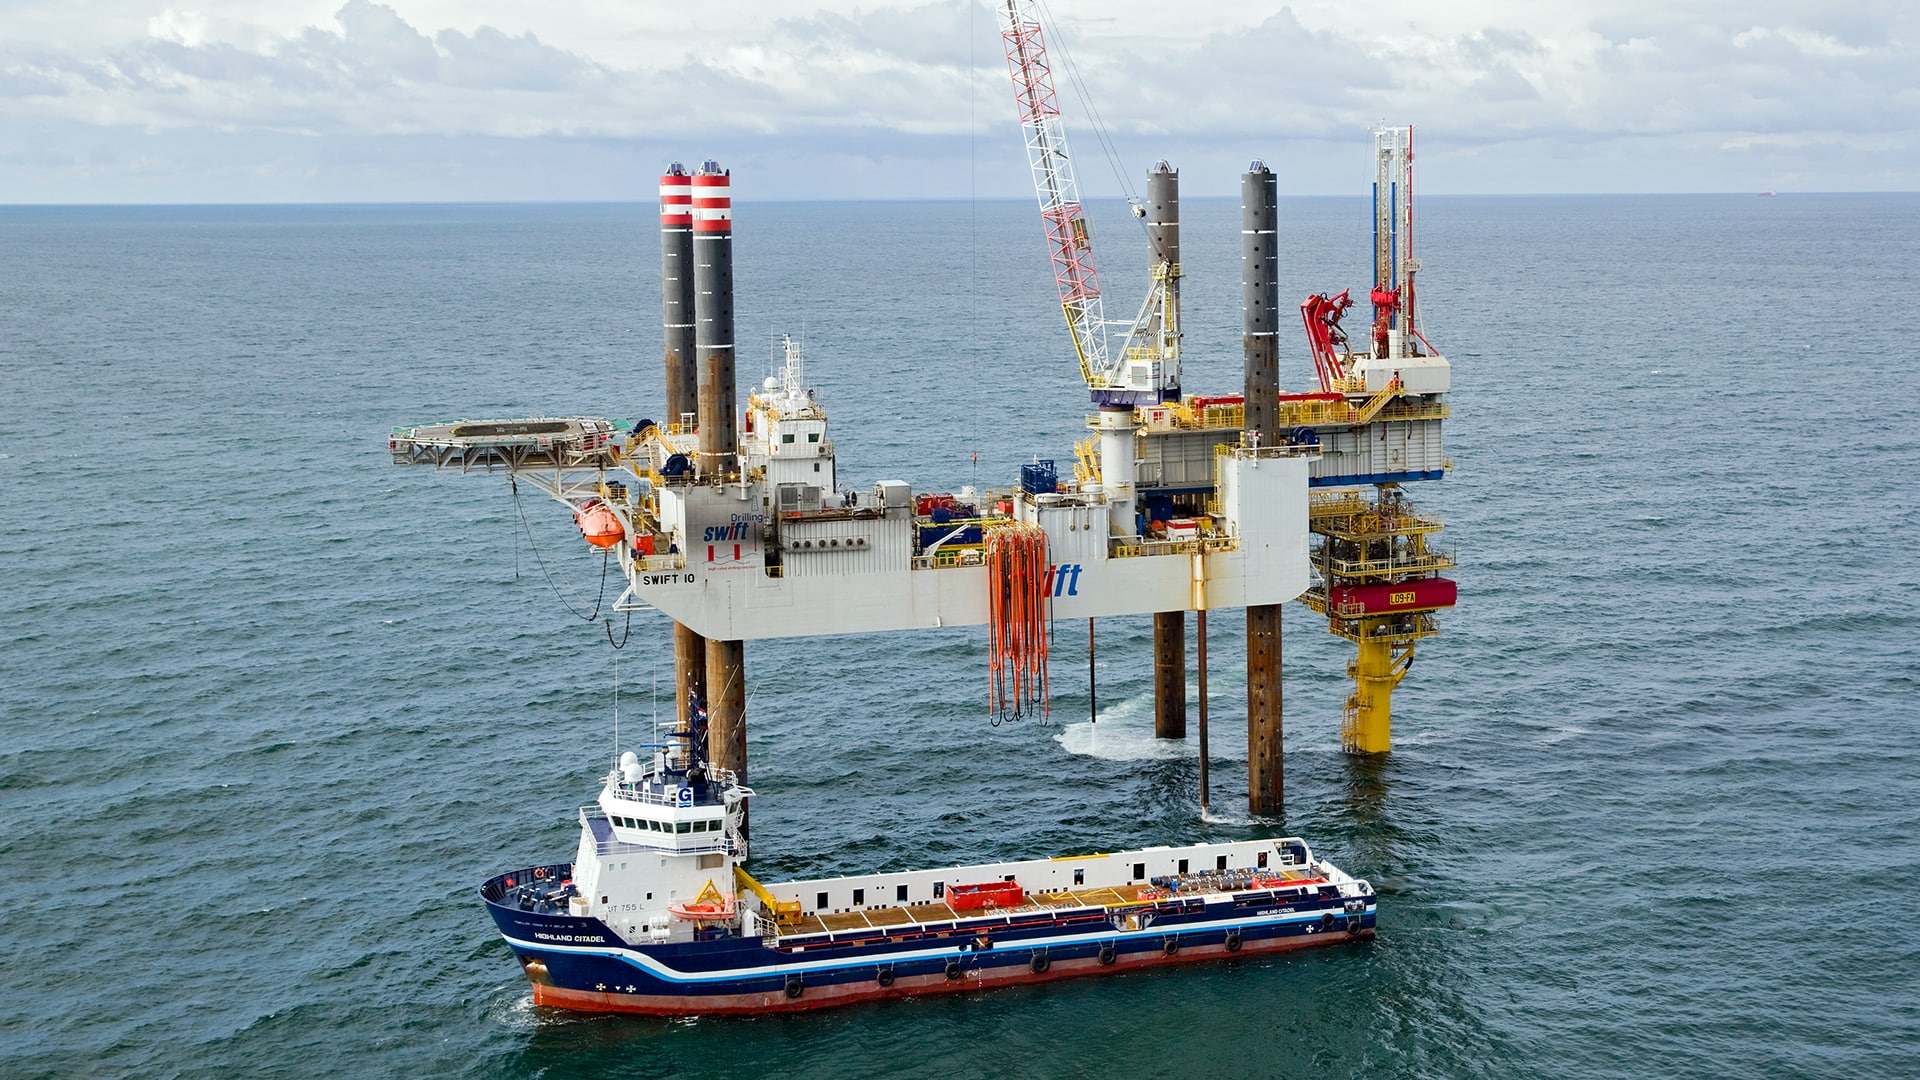 Drilling, Swift 10, Building, HVG CS, Offshore, Rig, Industrial